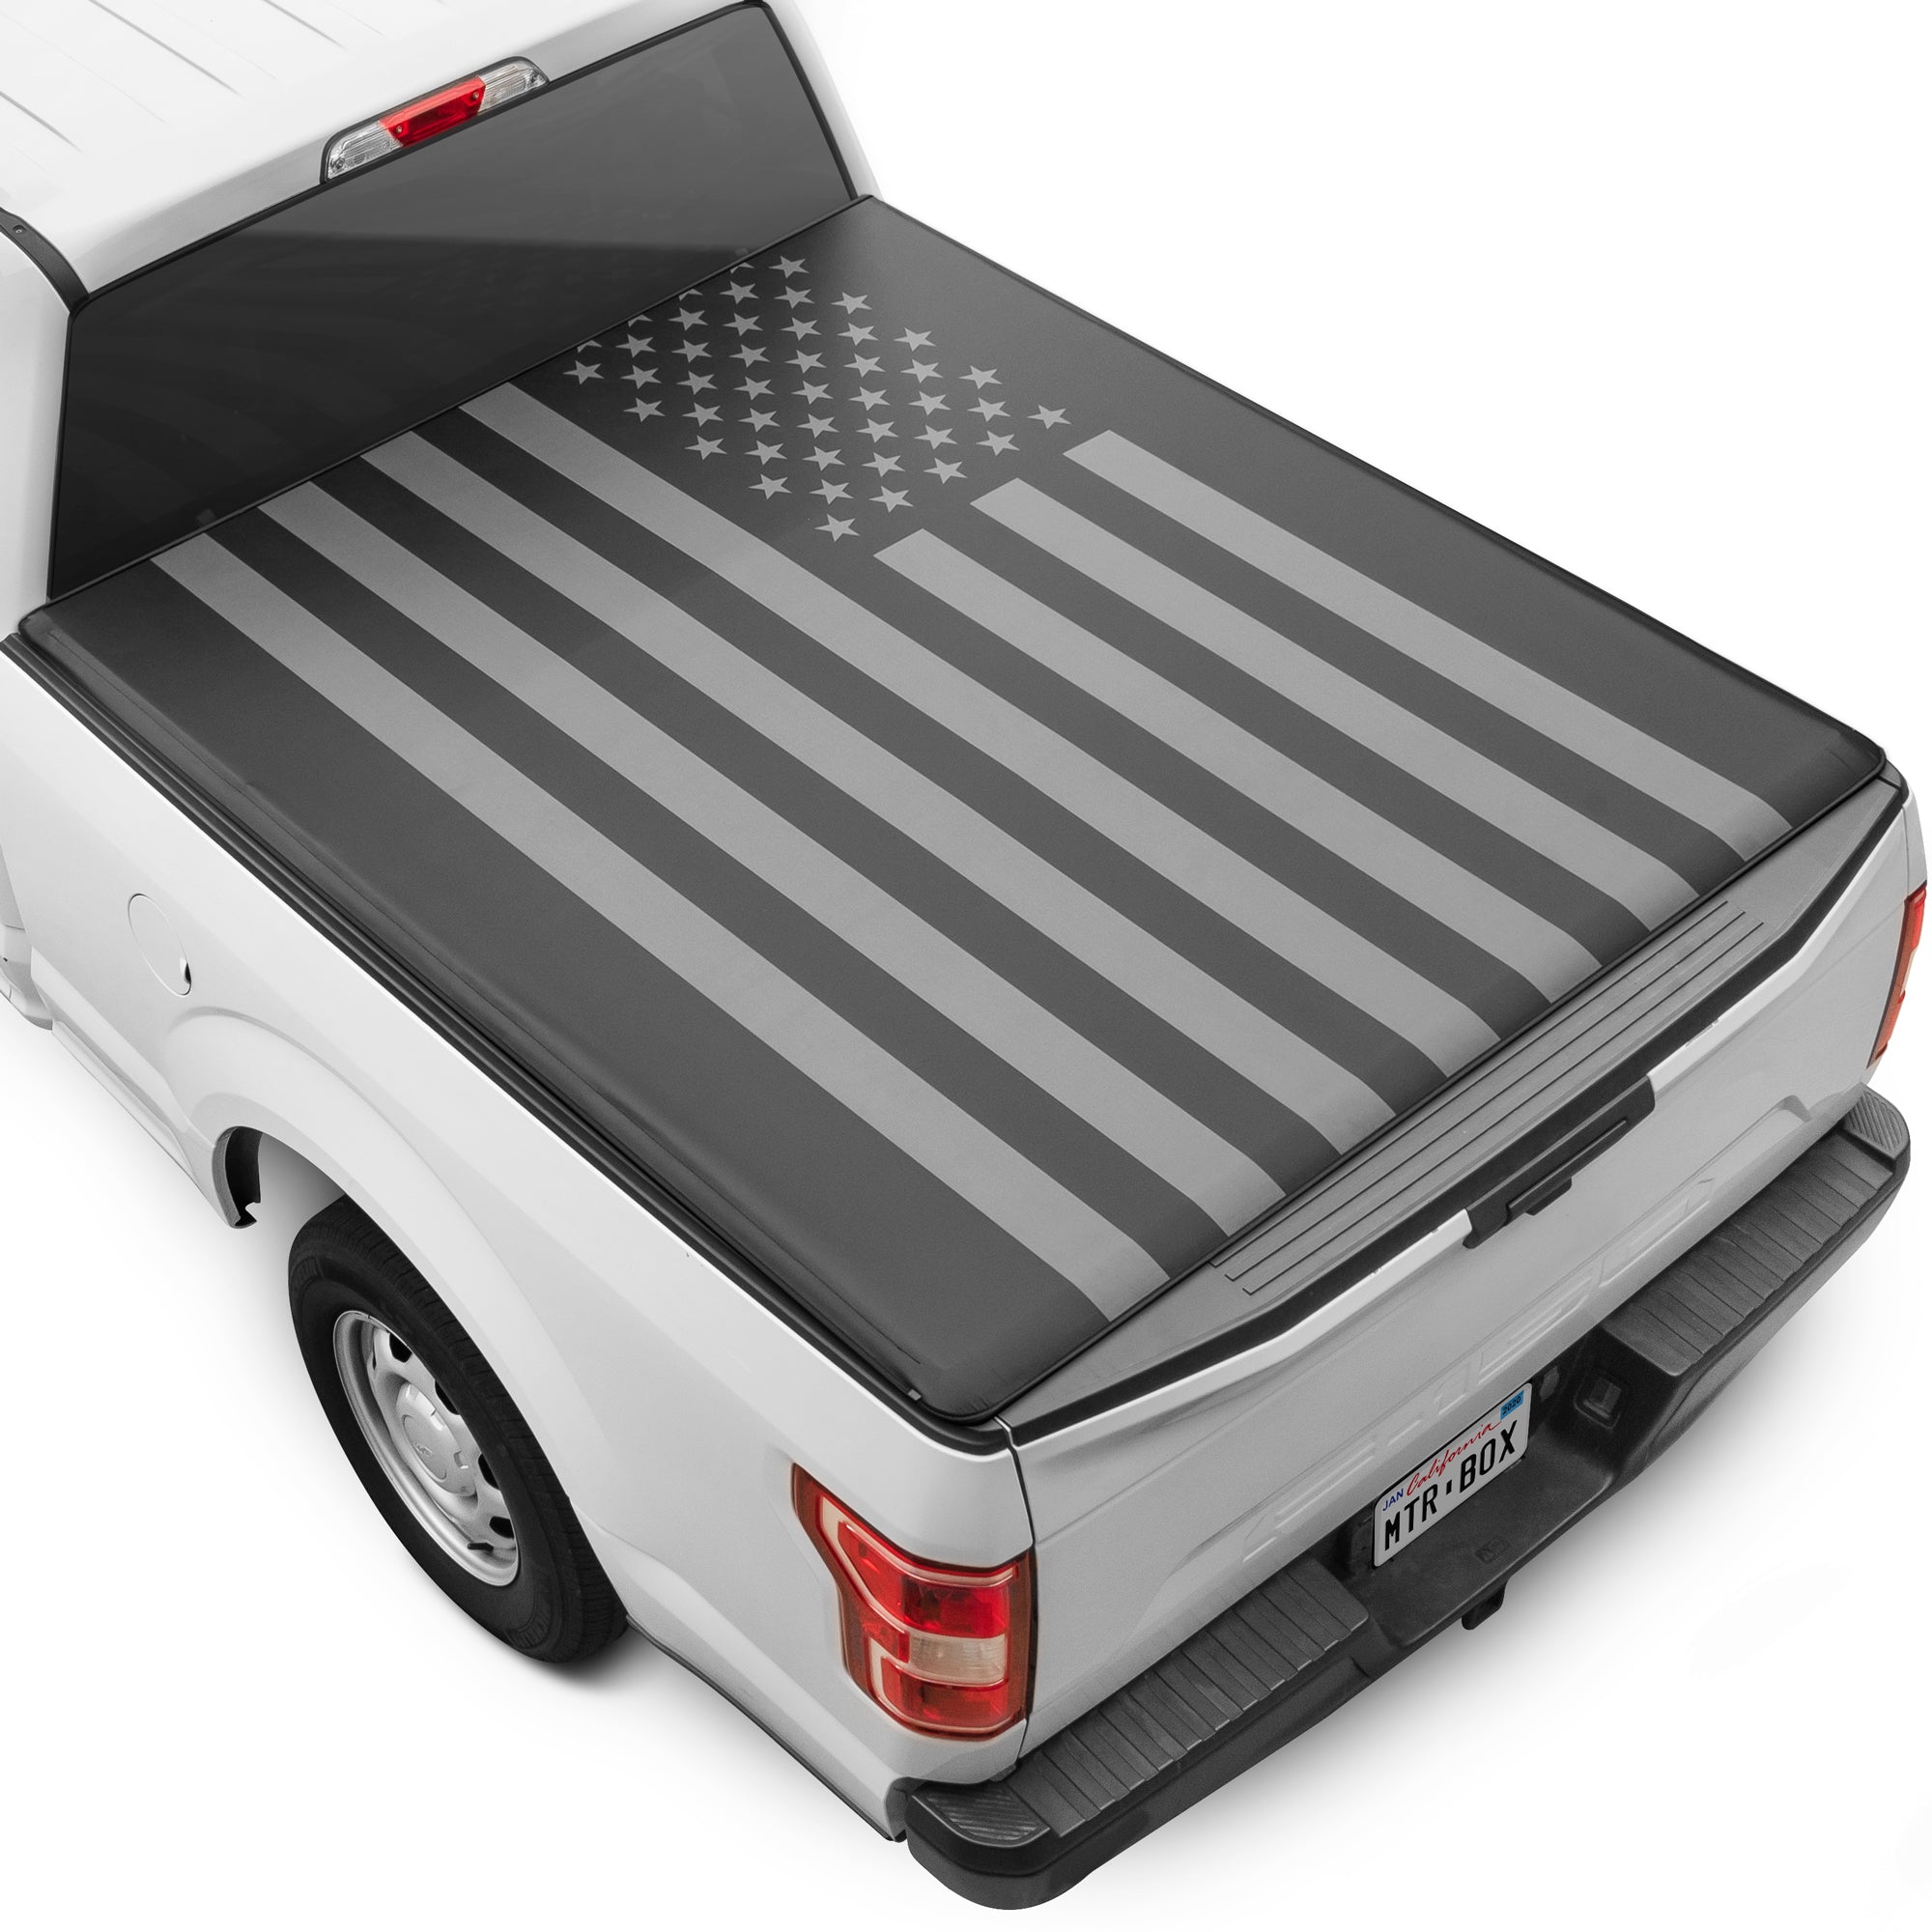 Black Flag Tonneau Cover Soft Roll-up Truck Bed Protector All Weather Retractable for Ford F-150 2015-2023 5.5 ft